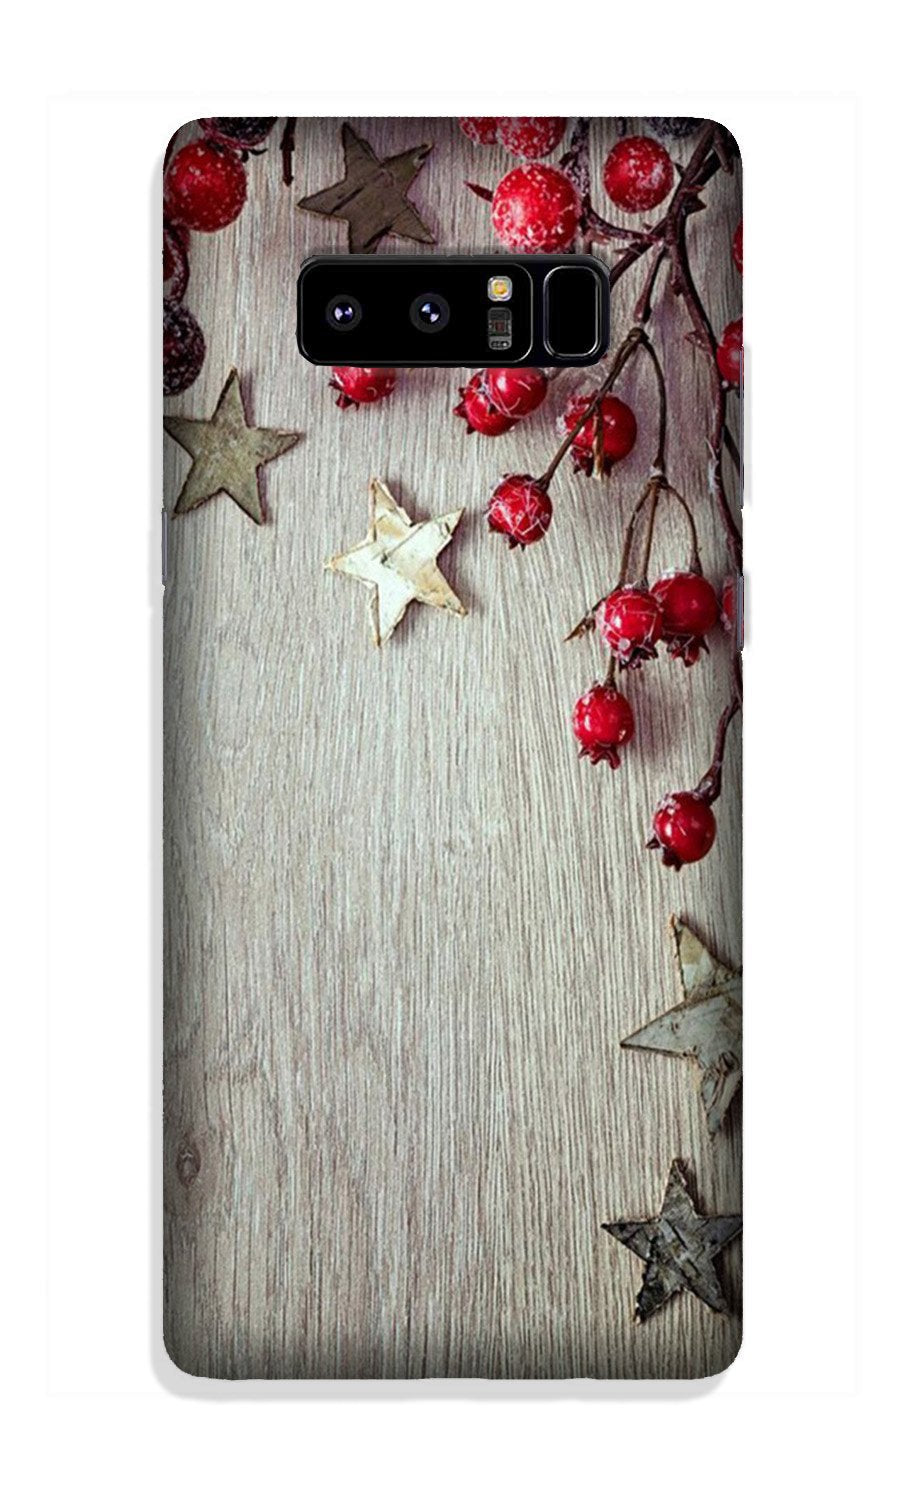 Stars Case for Galaxy Note 8